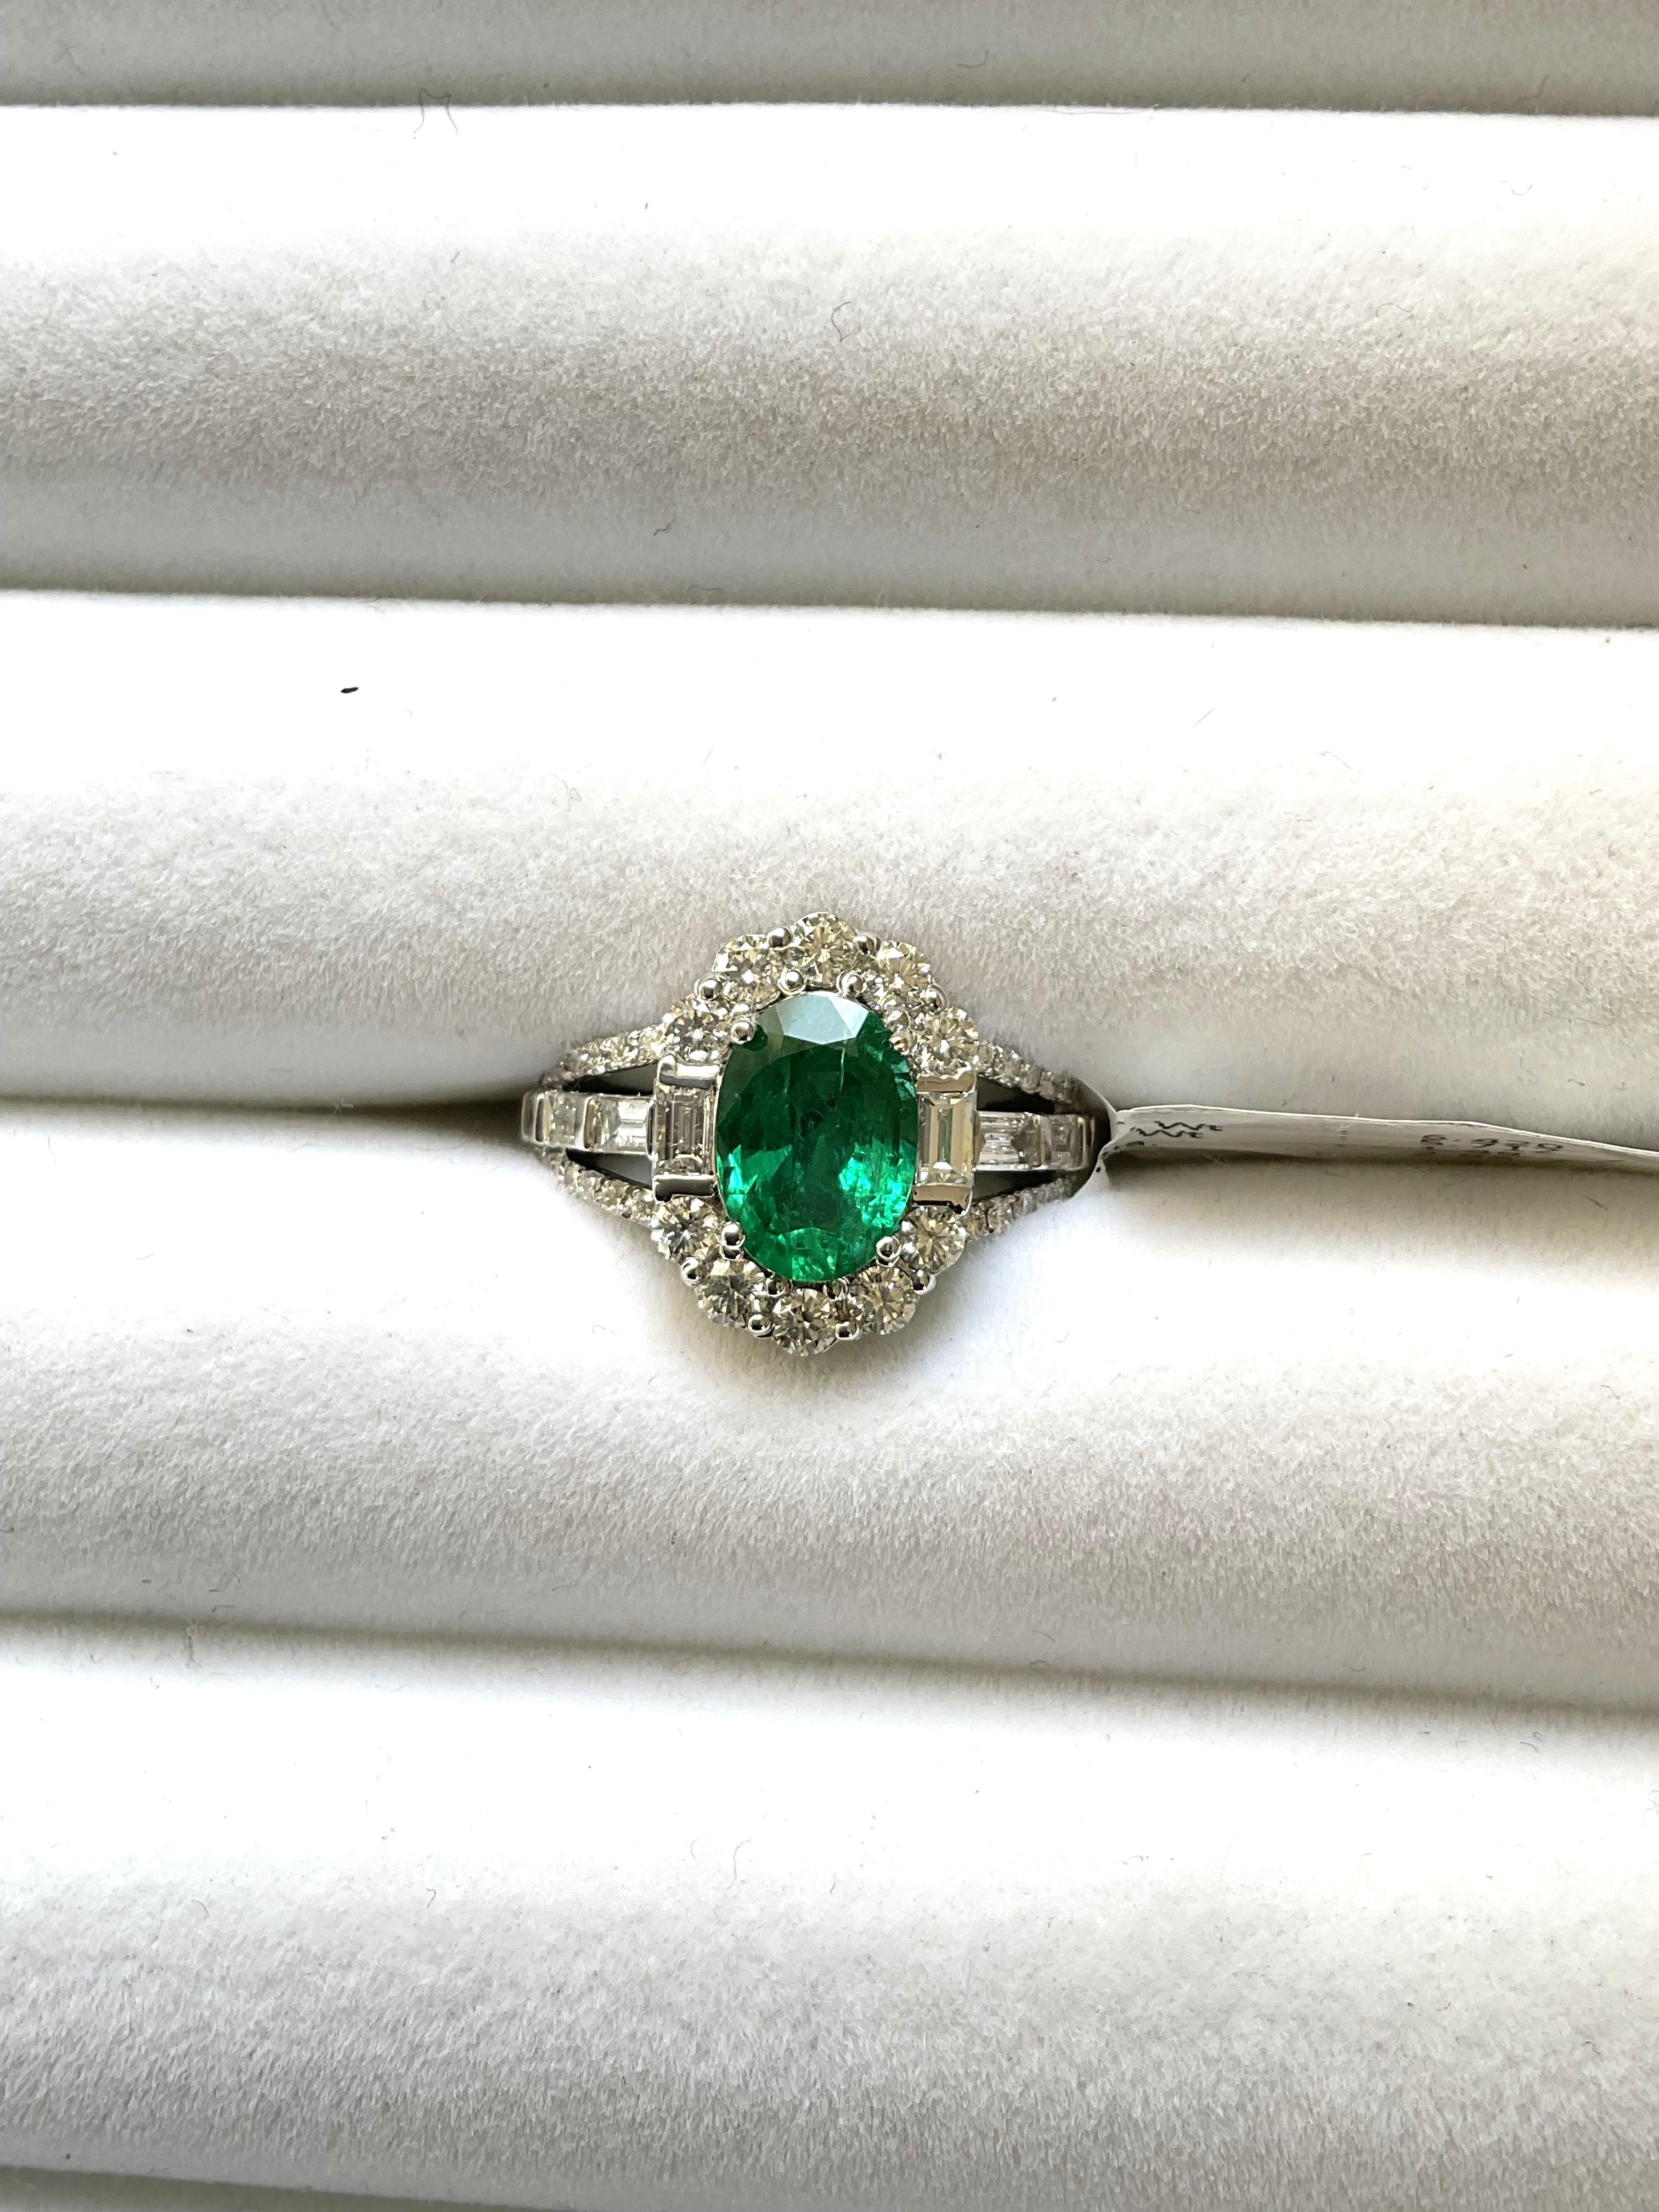 18k Gold Art Deco Zambian Emerald Cocktail Ring 2.05 cts with 1.49 ct Diamonds  For Sale 5